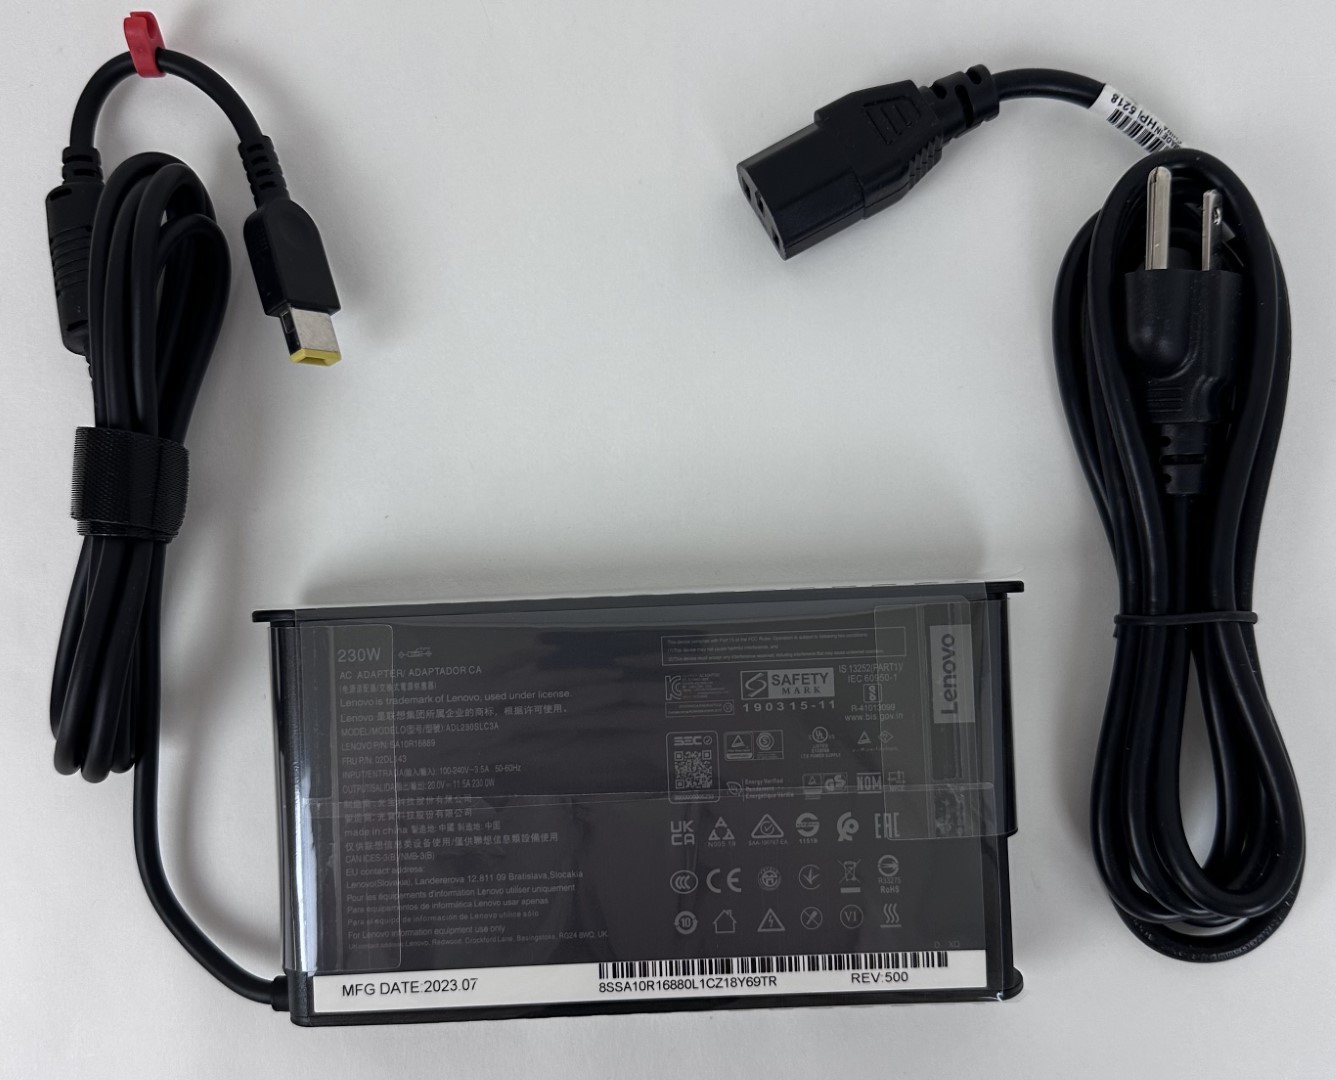 Lenovo AC Power Supply Charger Adapter SA10R16889 230W 02DL143 New Style BN